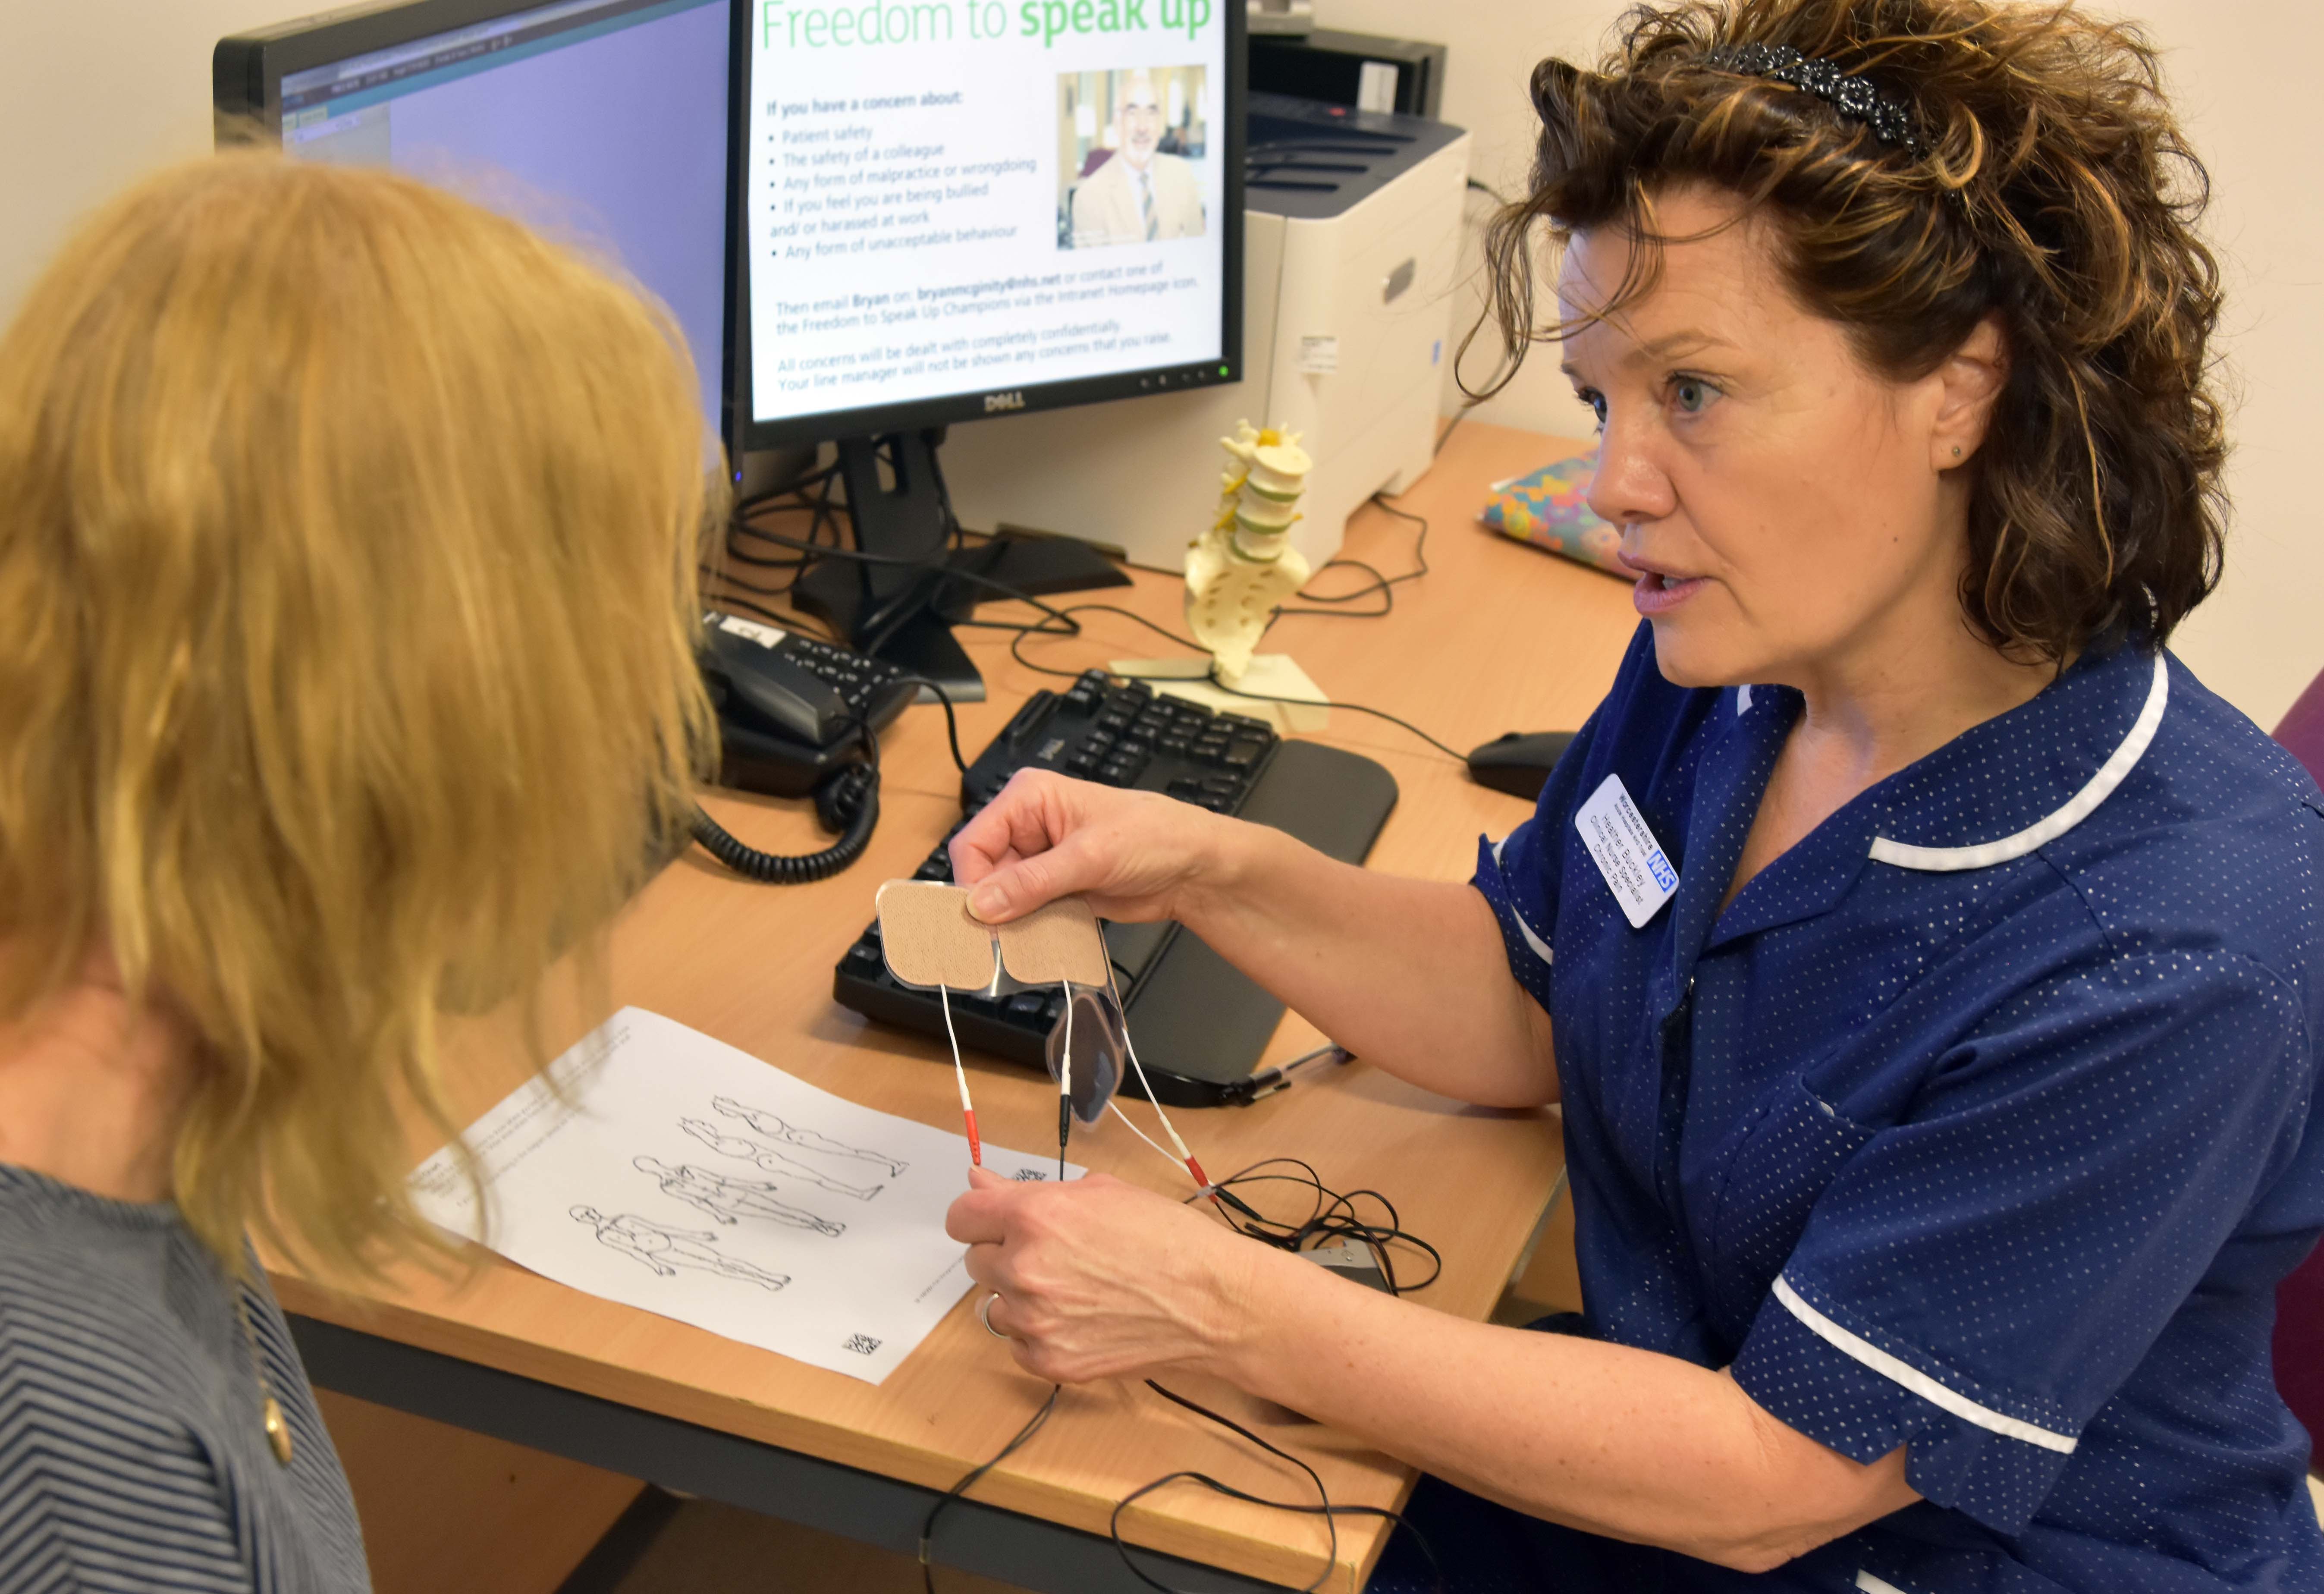 TENS (transcutaneous electrical nerve stimulation) - NHS